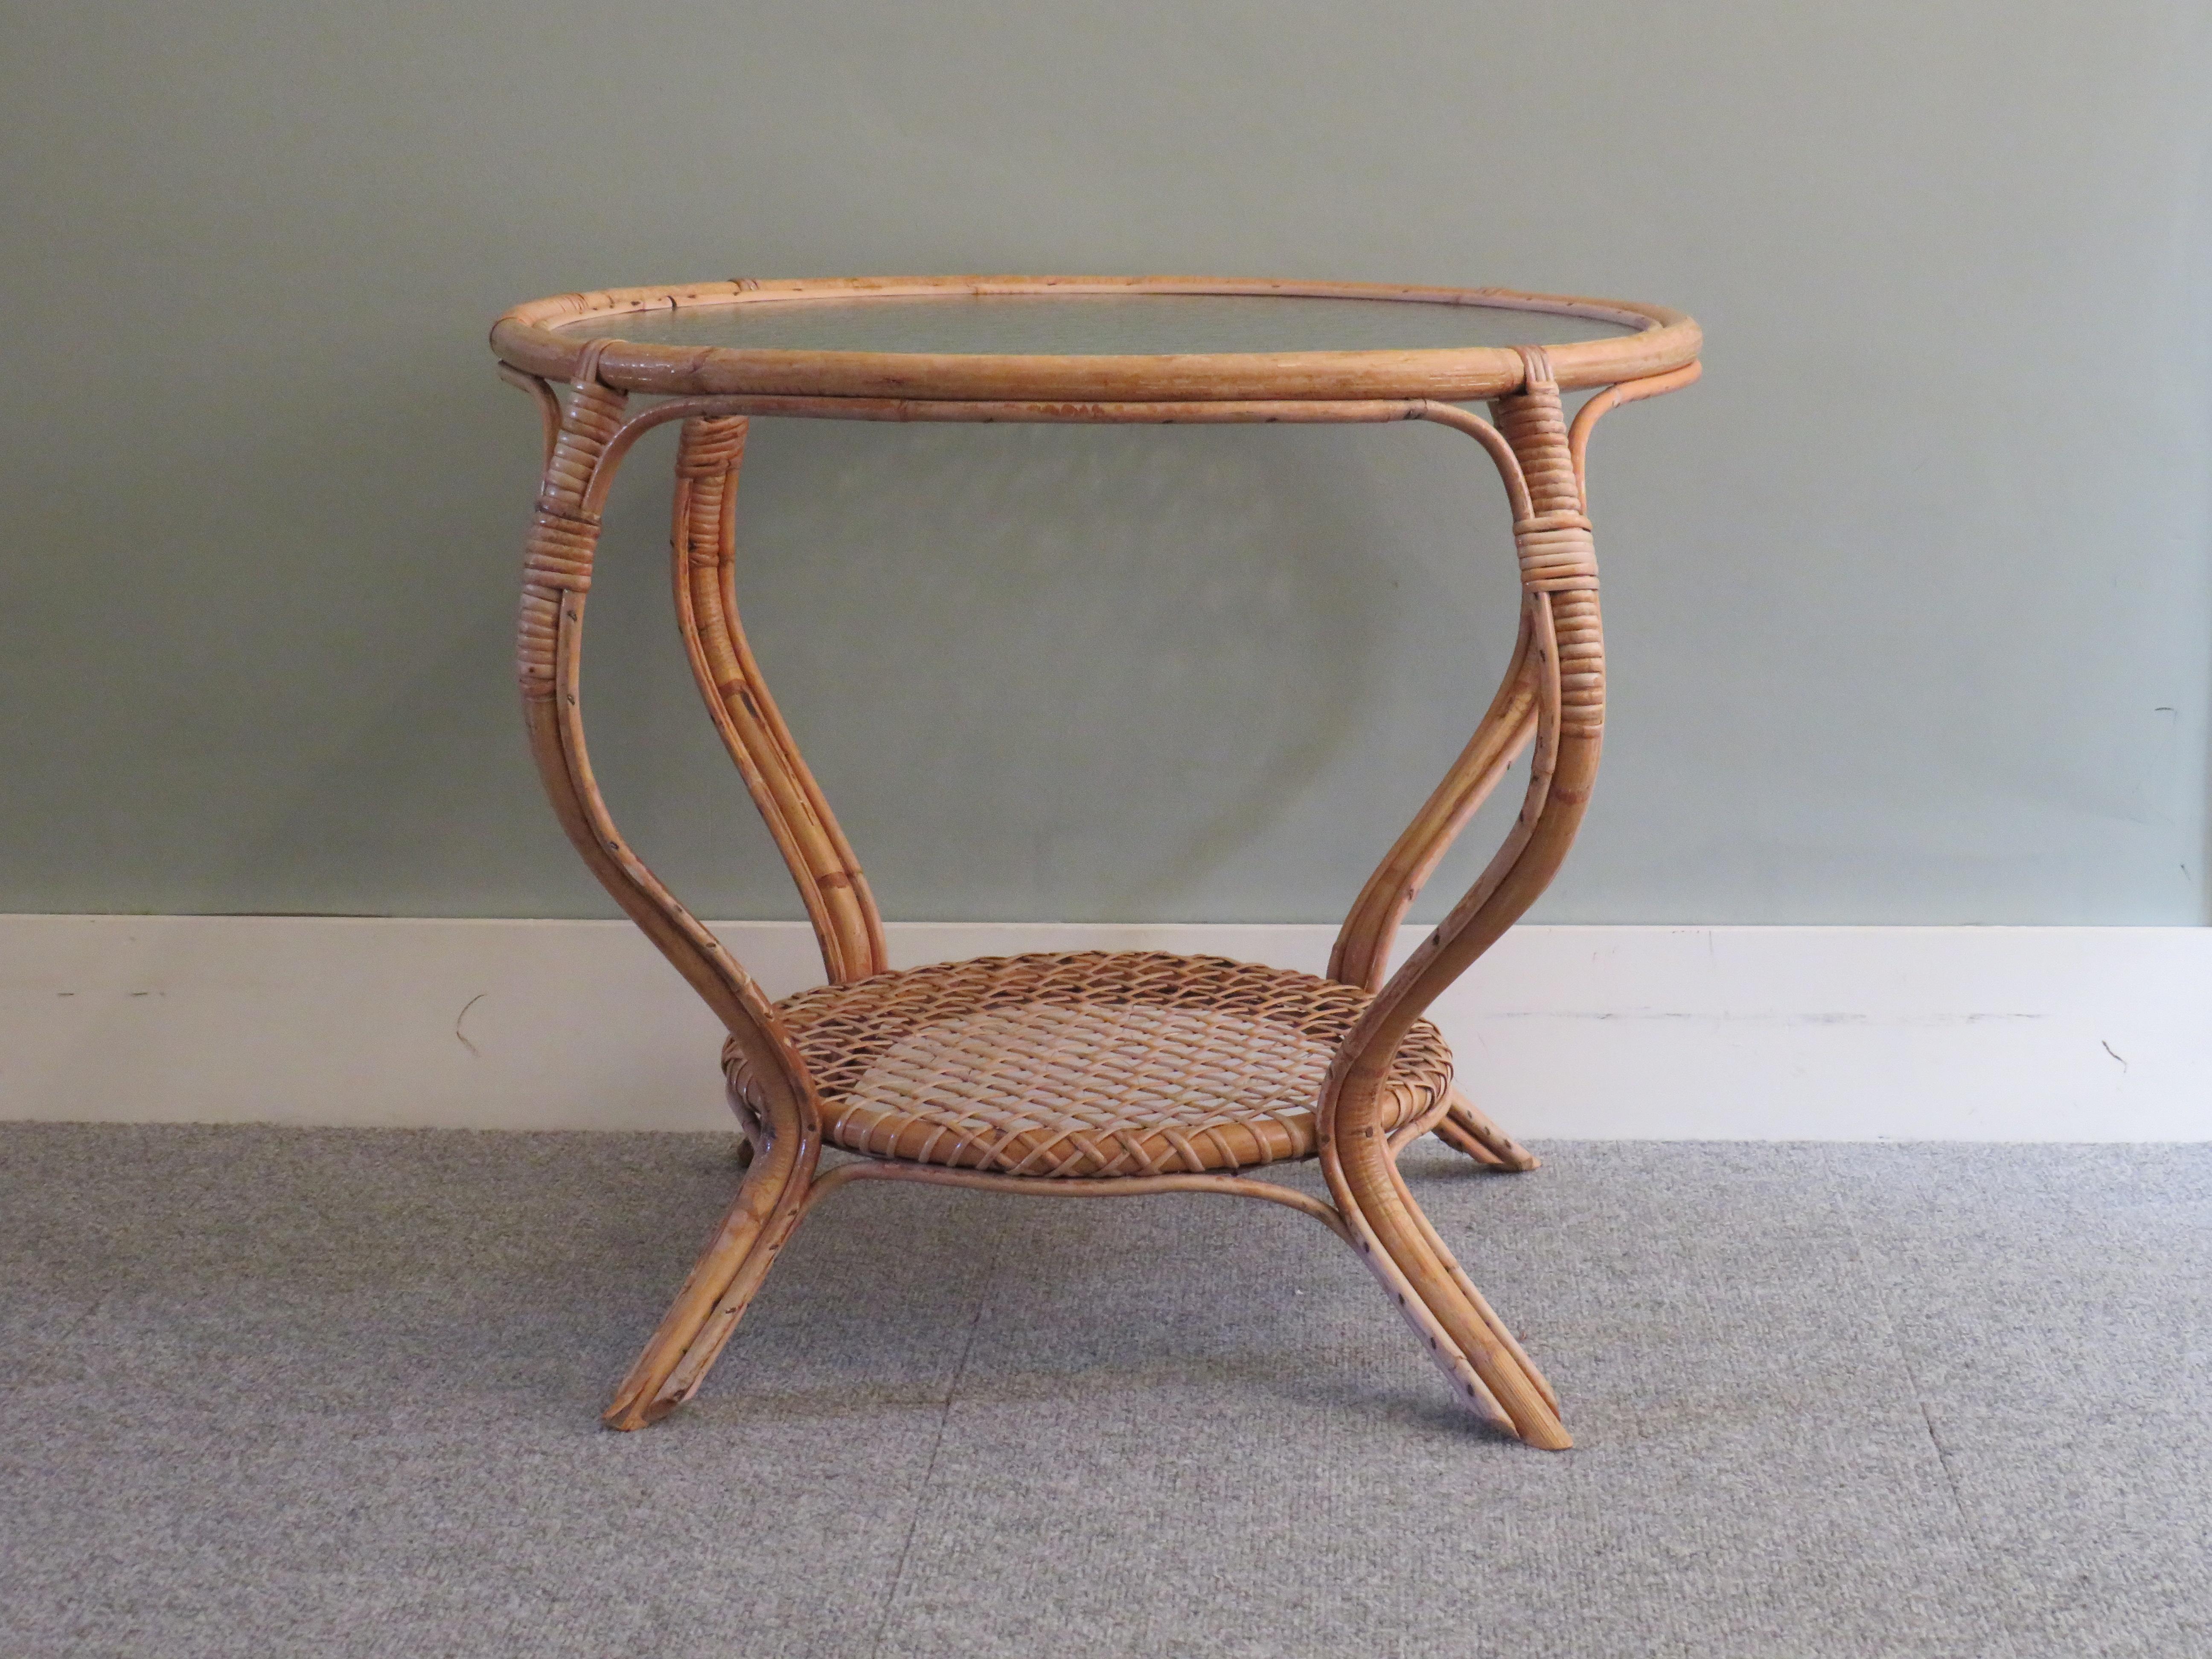 Round coffee table 1960s, France.
The table has a bamboo frame and a fixed bubble glass top.
The table has a diameter of 70 cm and a height of 55 cm.
The diameter of the glass top is 65 cm and the diameter of the bottom wicker top is 40 cm, this